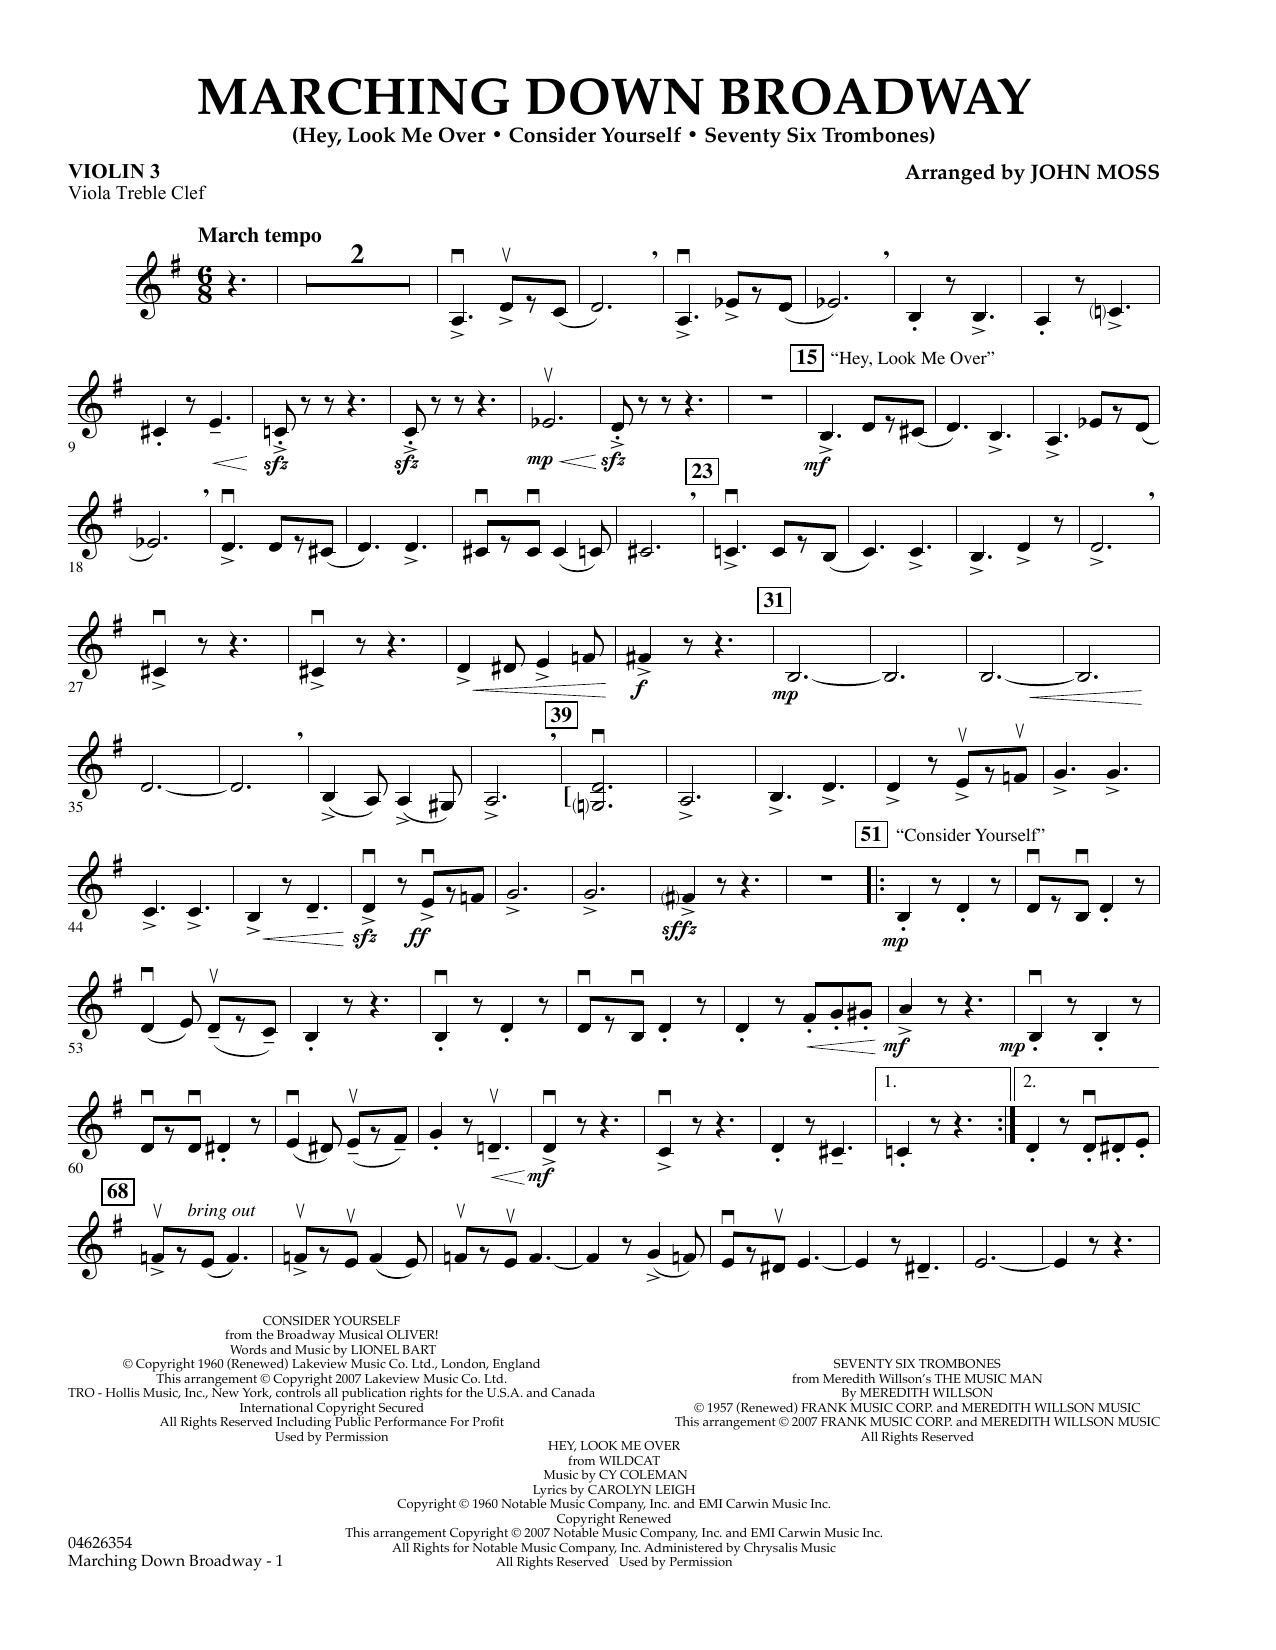 John Moss Marching Down Broadway - Violin 3 (Viola Treble Clef) sheet music preview music notes and score for Orchestra including 2 page(s)